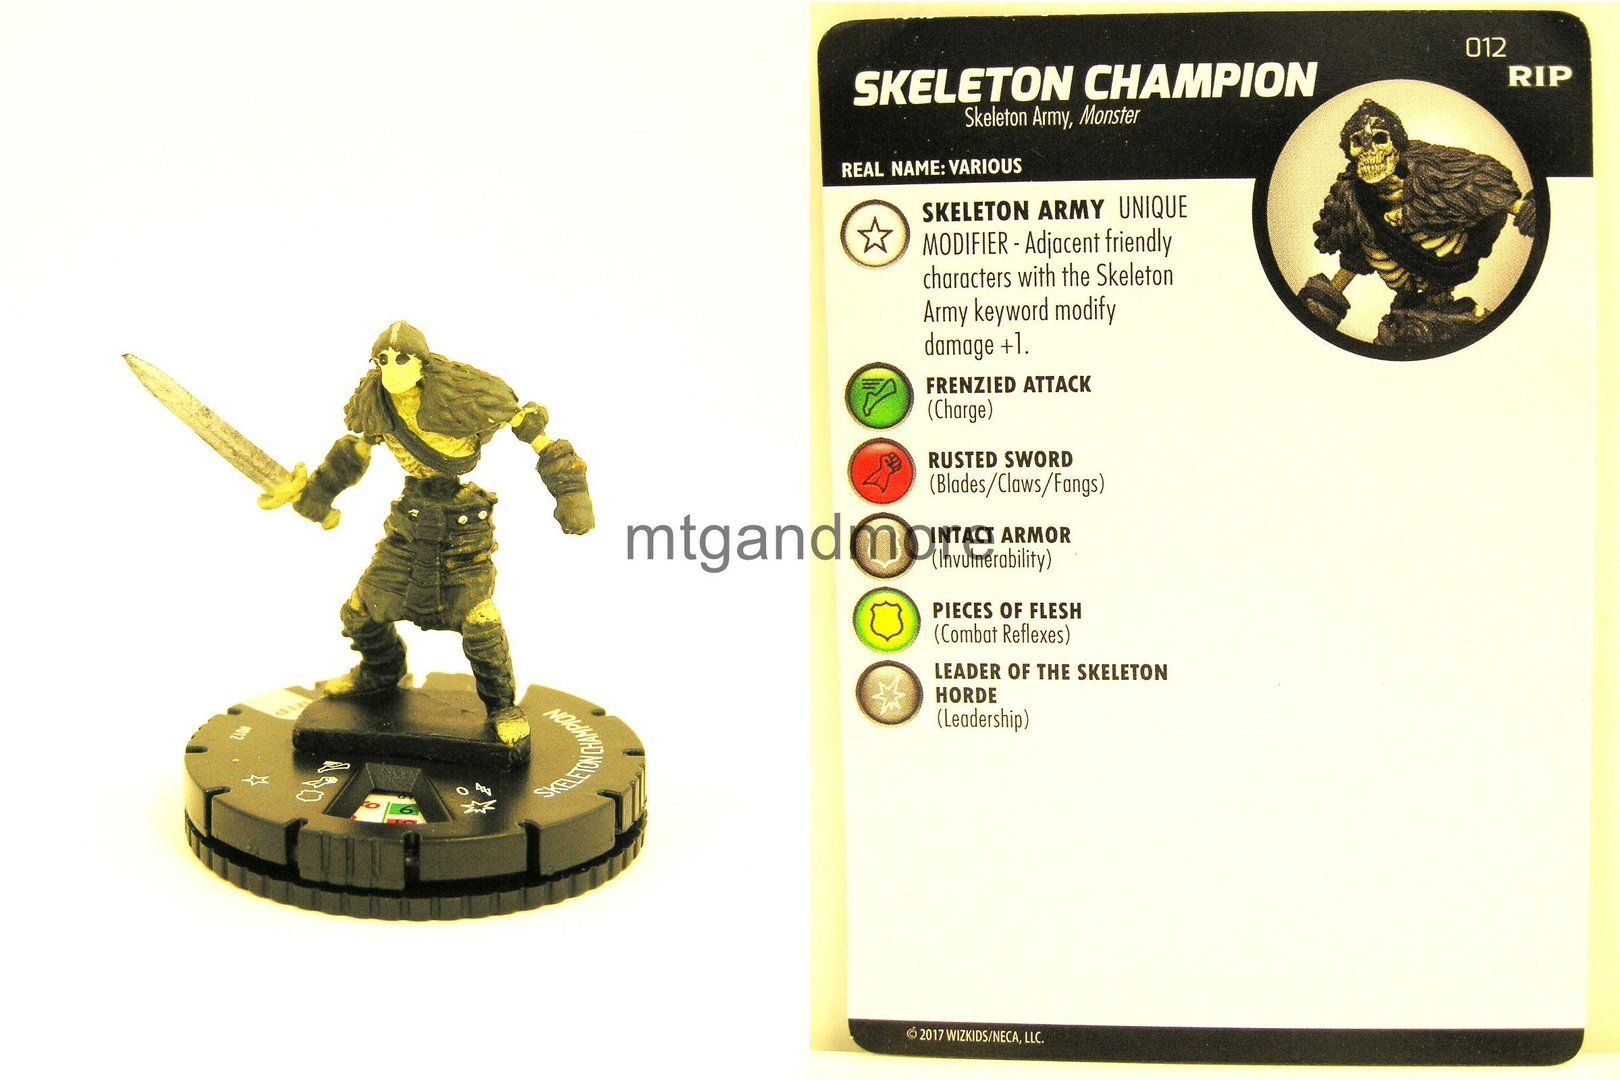 ZOMBIE ABRAHAM LINCOLN 008 Undead HeroClix 